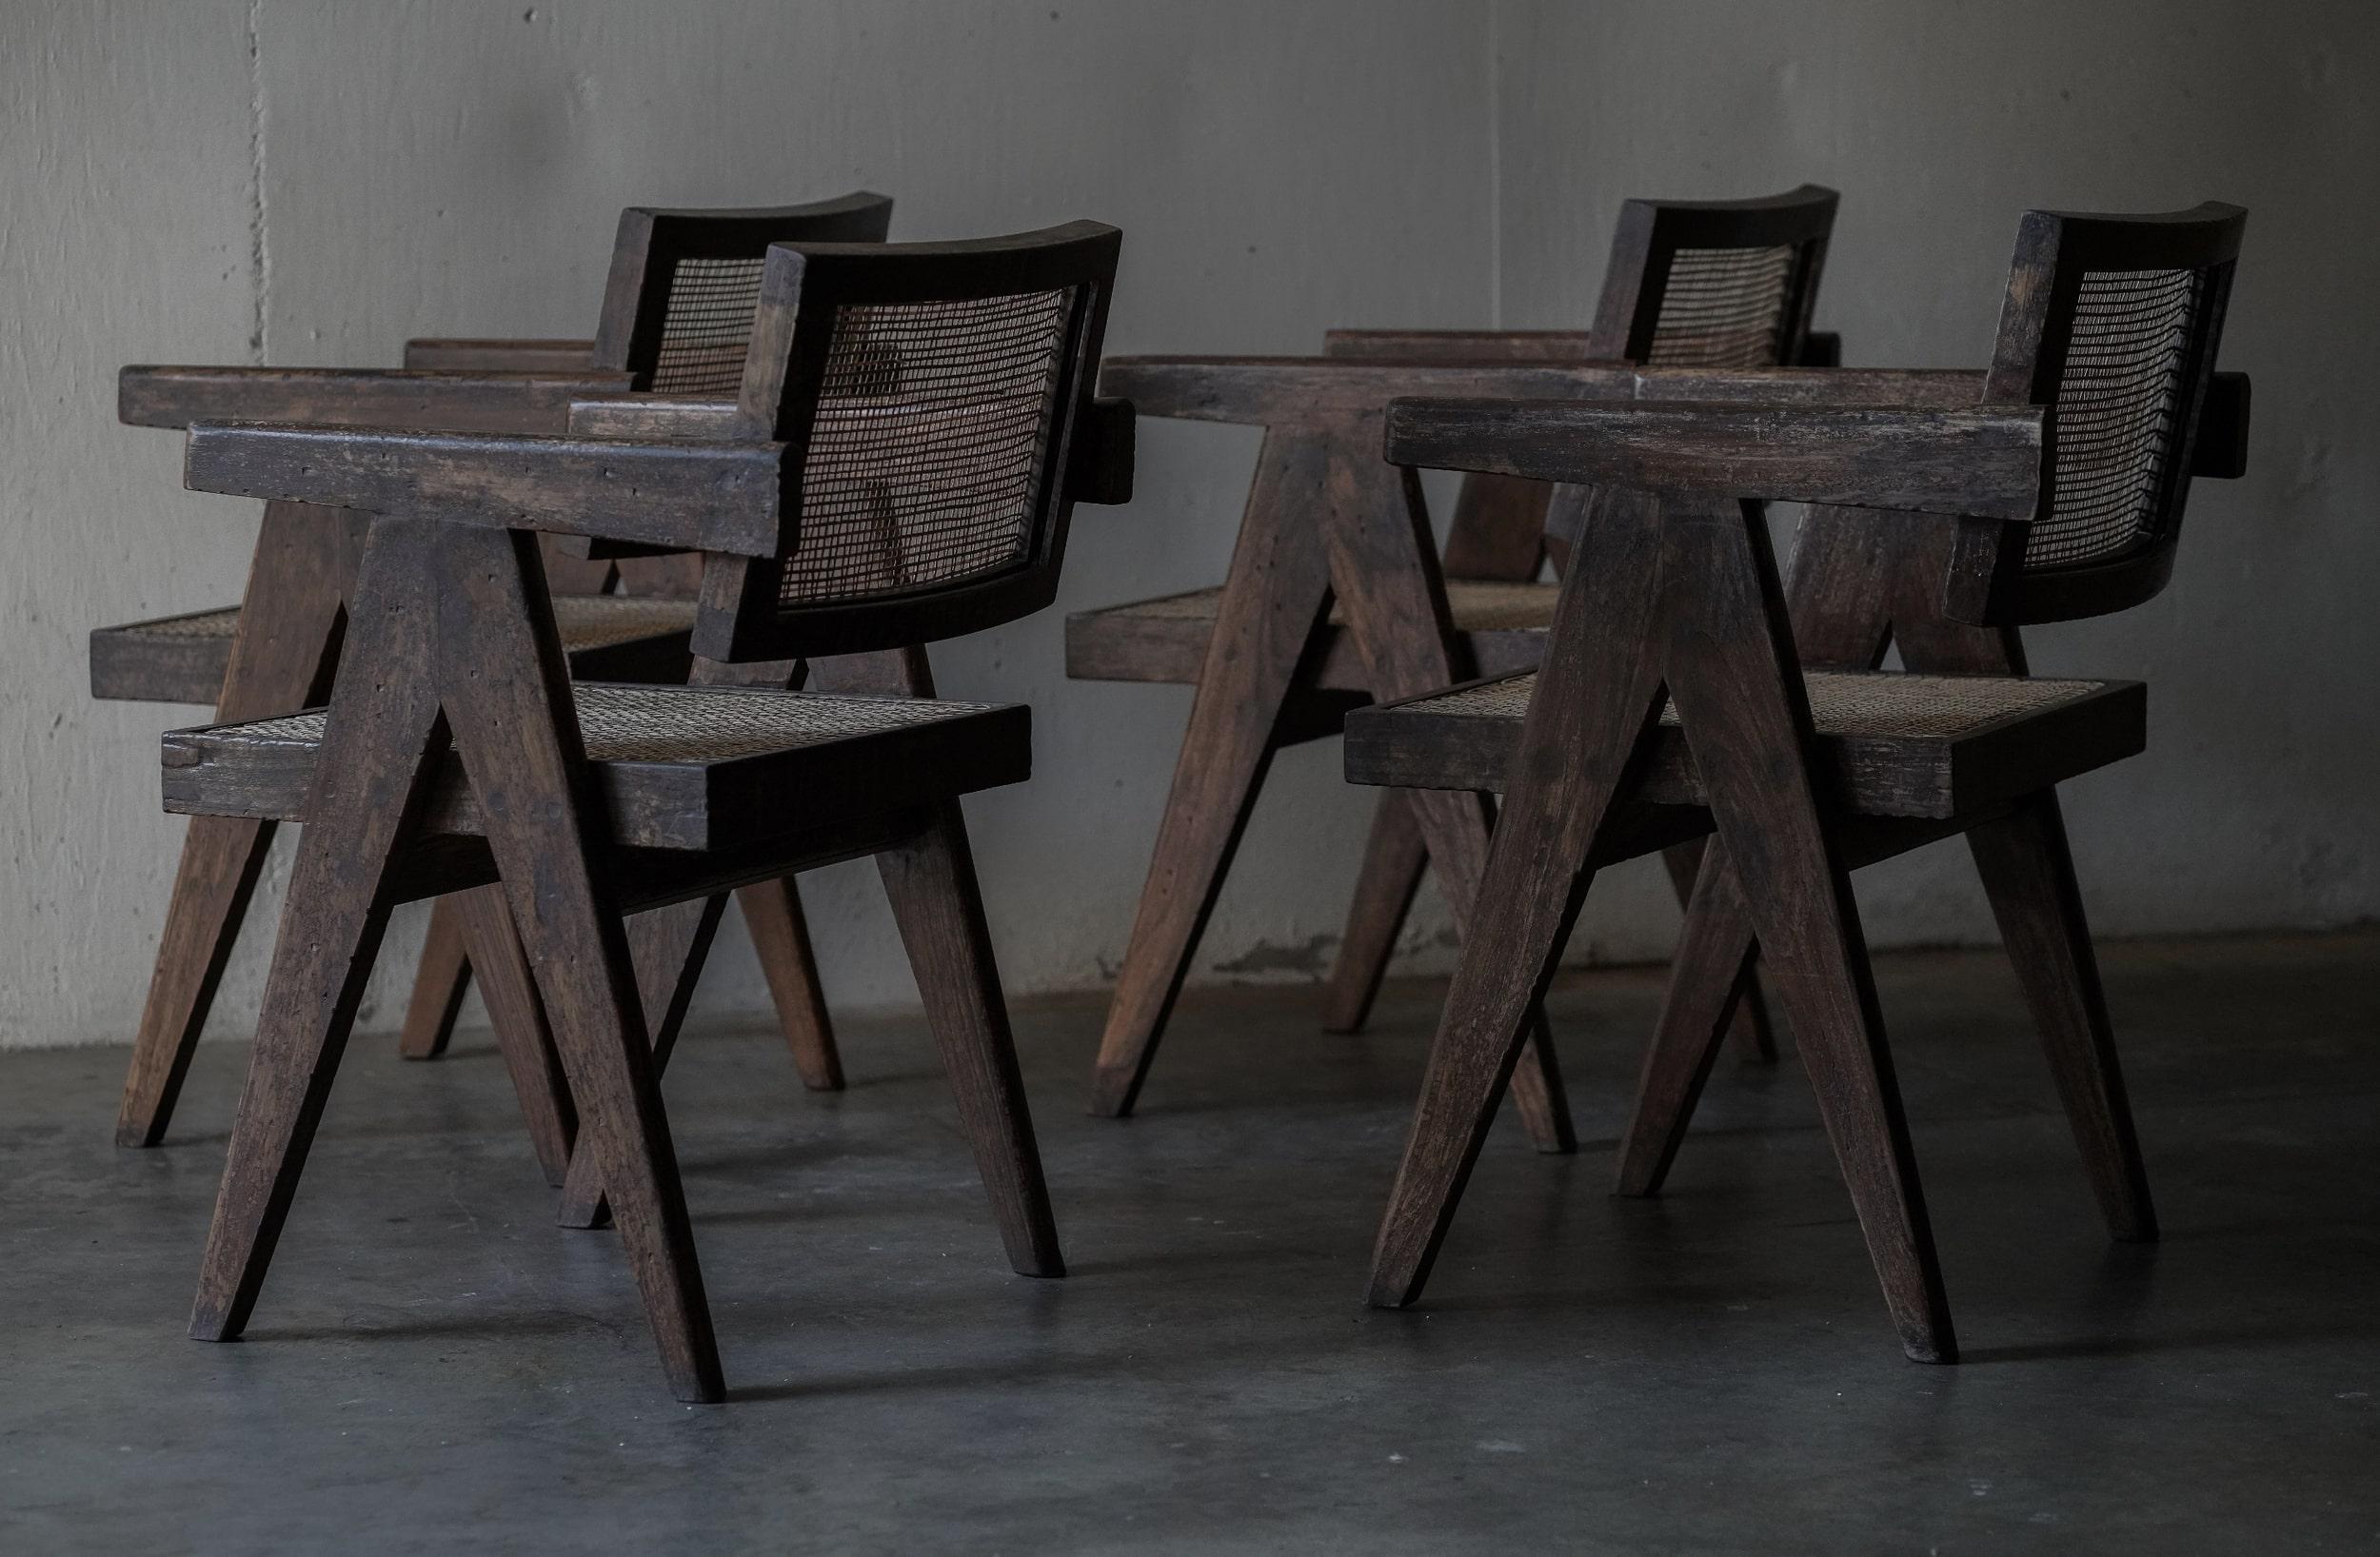 Exceptional set of 6 Pierre Jeanneret caned dining chairs with arms in teakwood with amazing patina and unique lettering. 

All chairs in very good vintage conditions.

Caned in India prior to arrival to me by experts who has been working on these